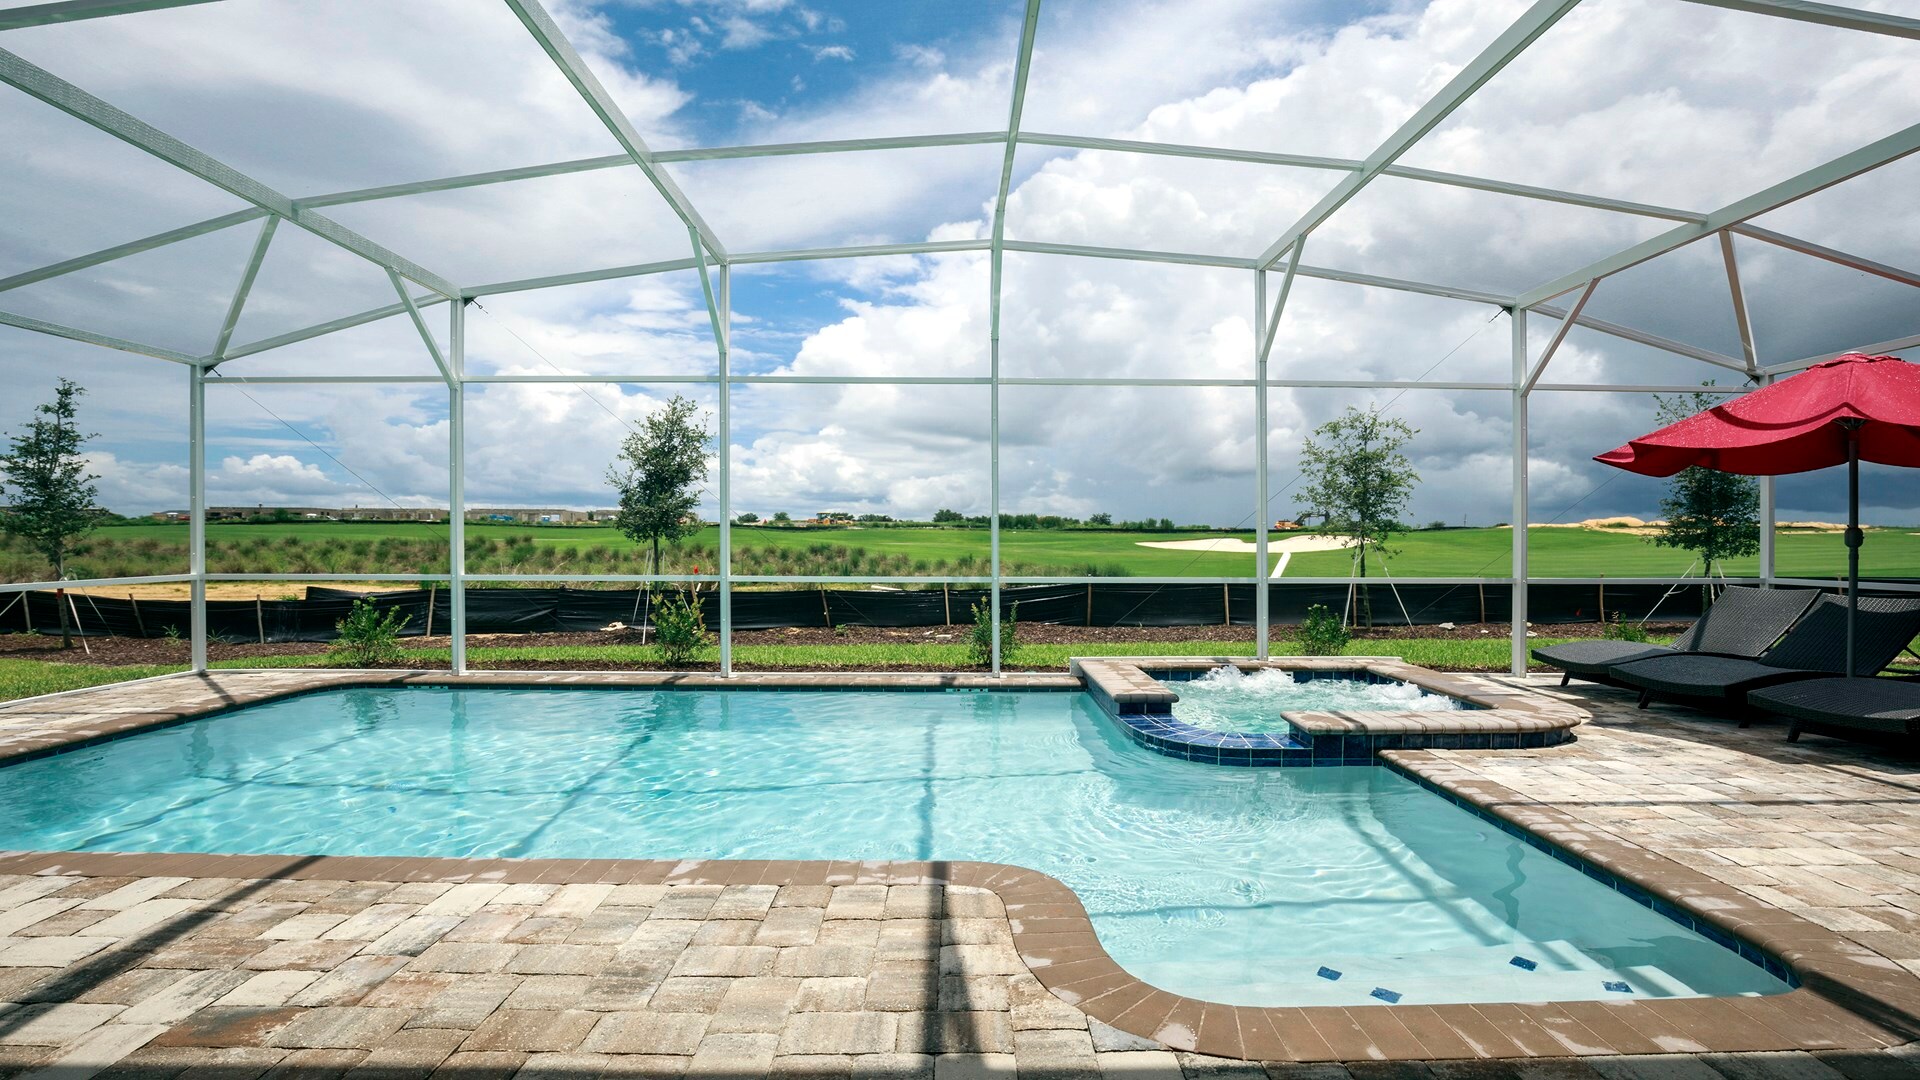 Enjoy stunning views from your own private pool